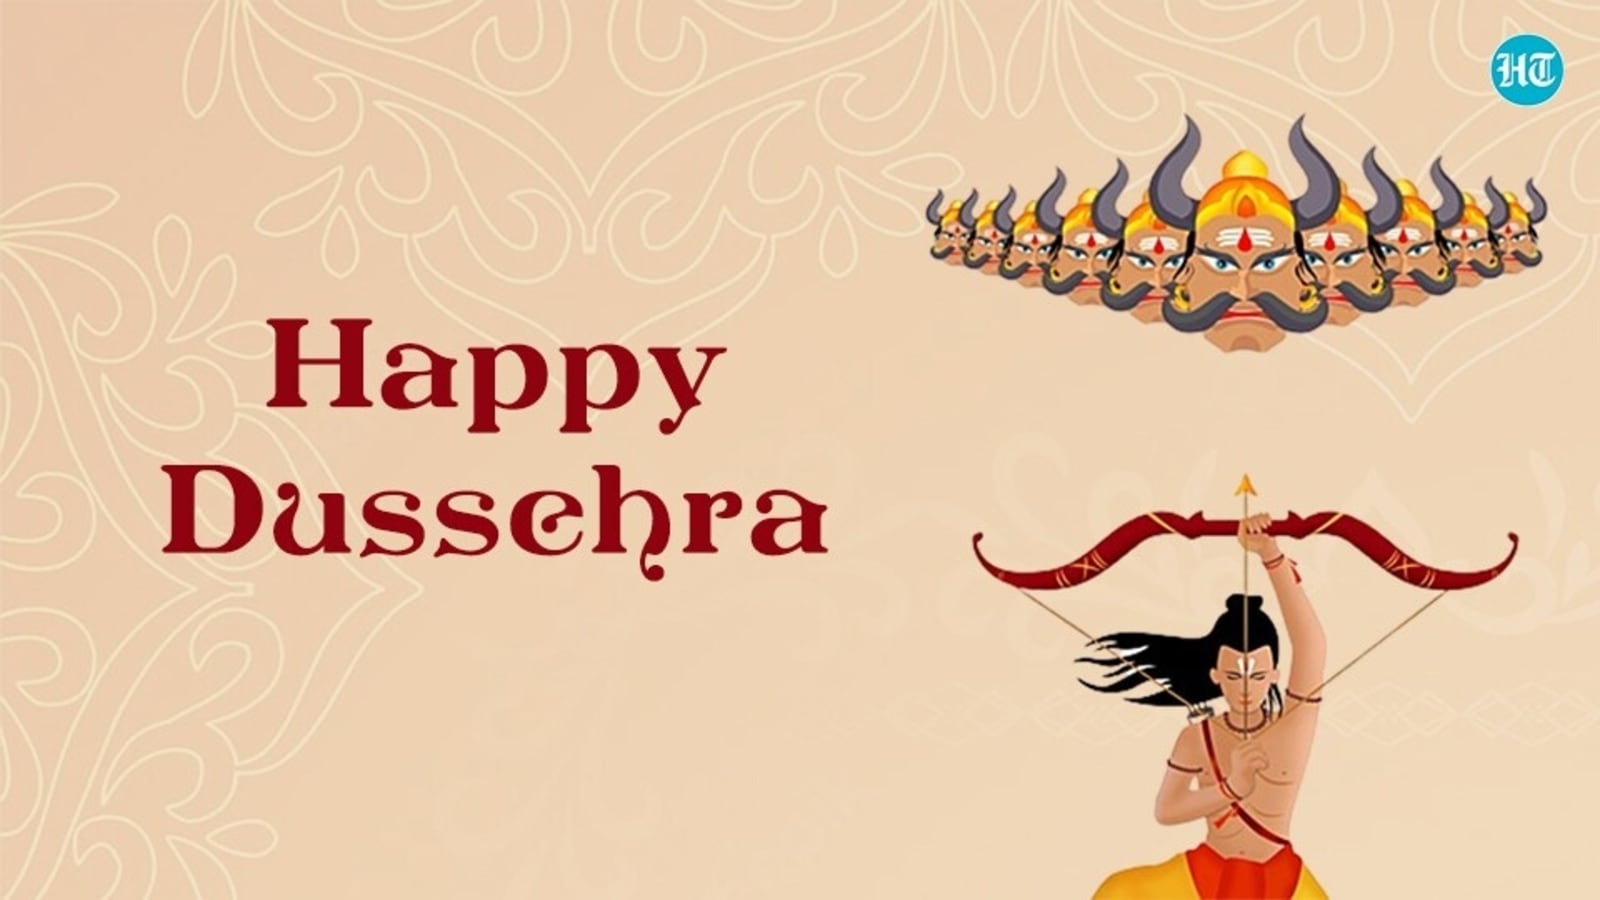  Happy Dussehra Wishes Images  WhatsApp Status DP  Picture Photos Free  Download